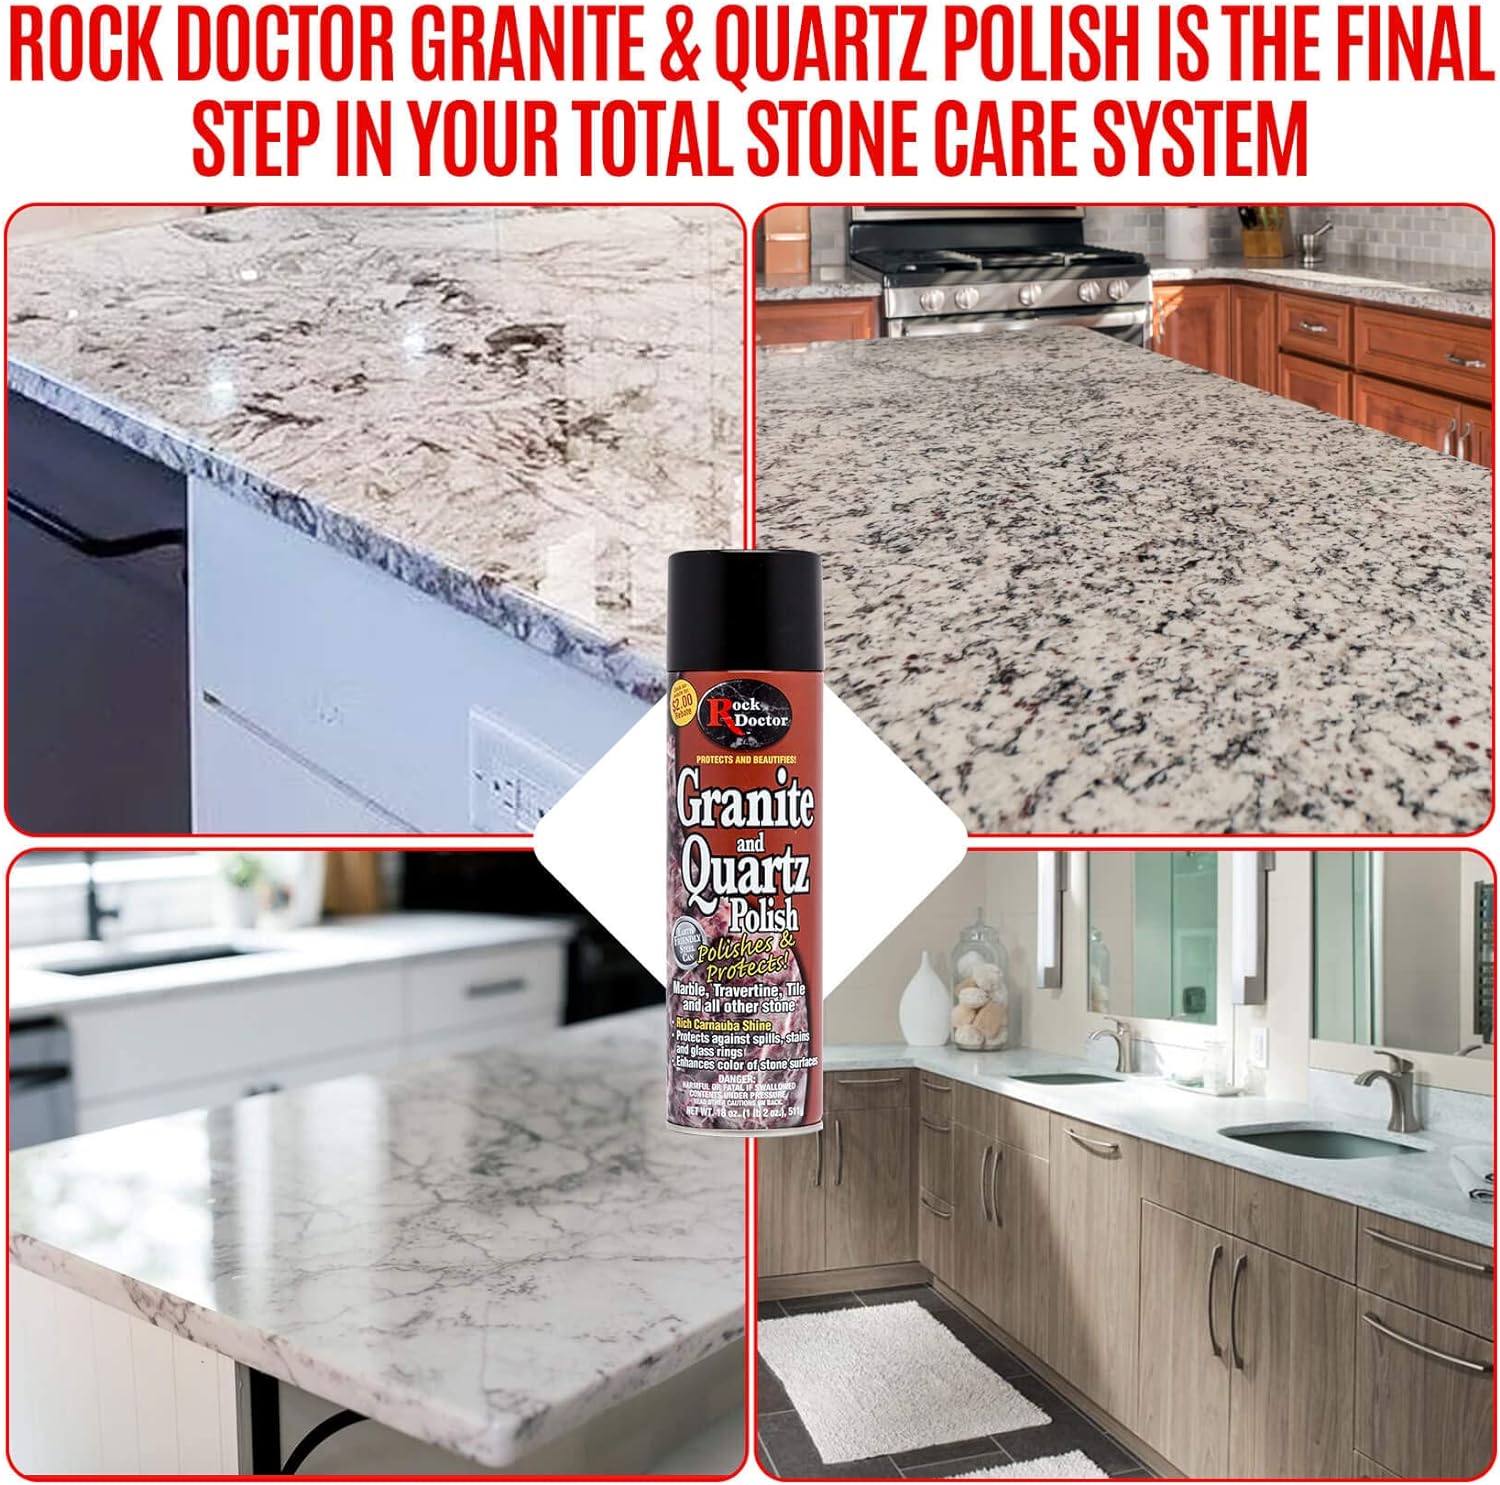 Rock Doctor Granite Polish Spray and Surface,18oz.Can Polish Tile, Marble, Kitchen Countertop, and Natural Stone Surfaces, Streak-Free Shine Pack of 1 : Health & Household